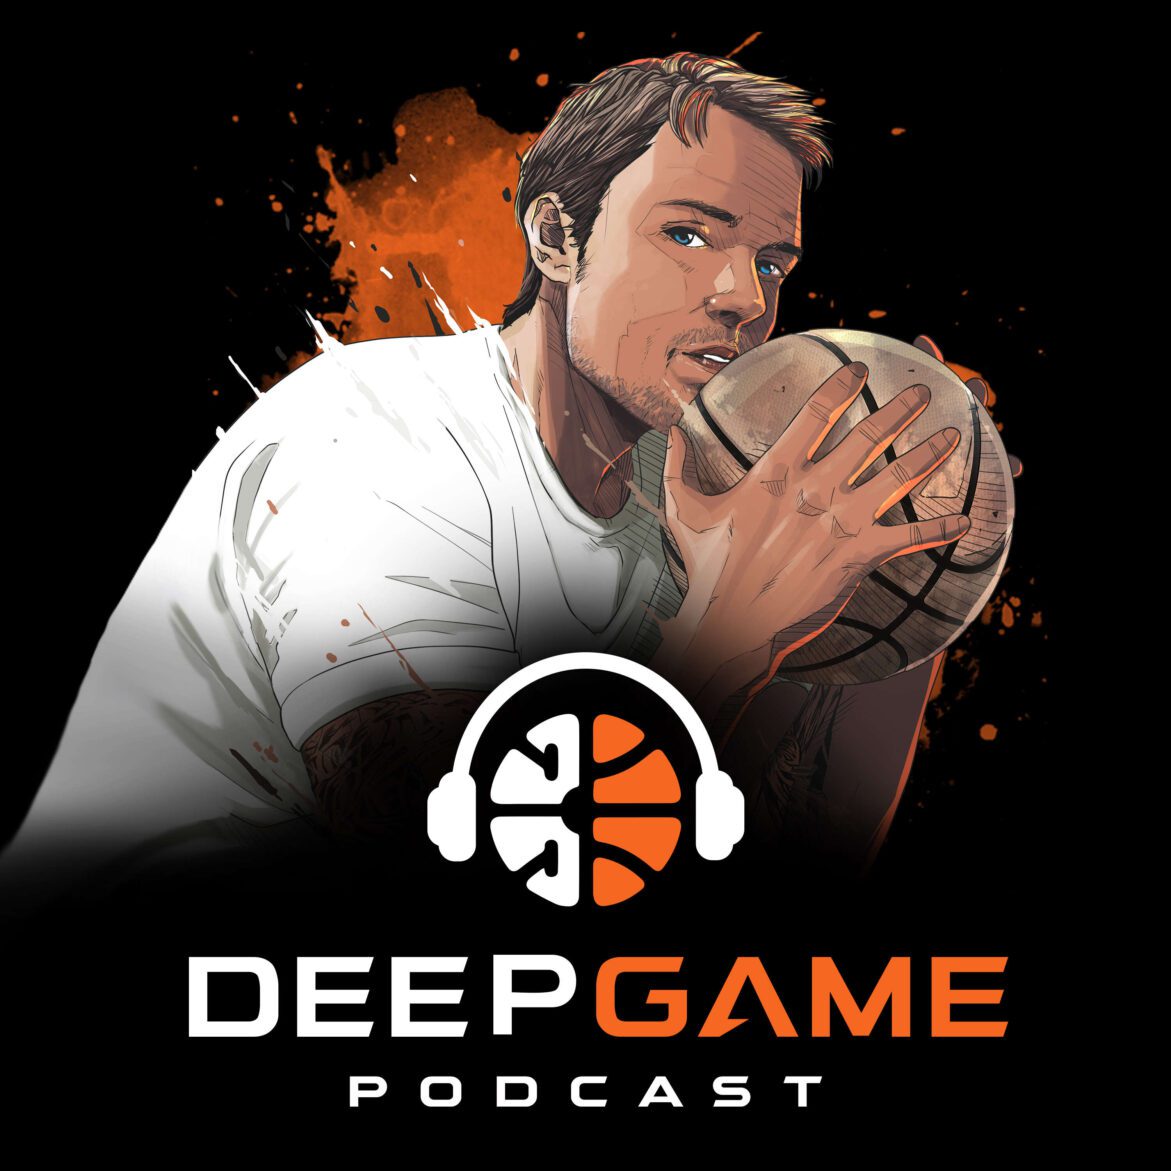 Black Podcasting - The 5 Rules Of Trash Talk In Basketball